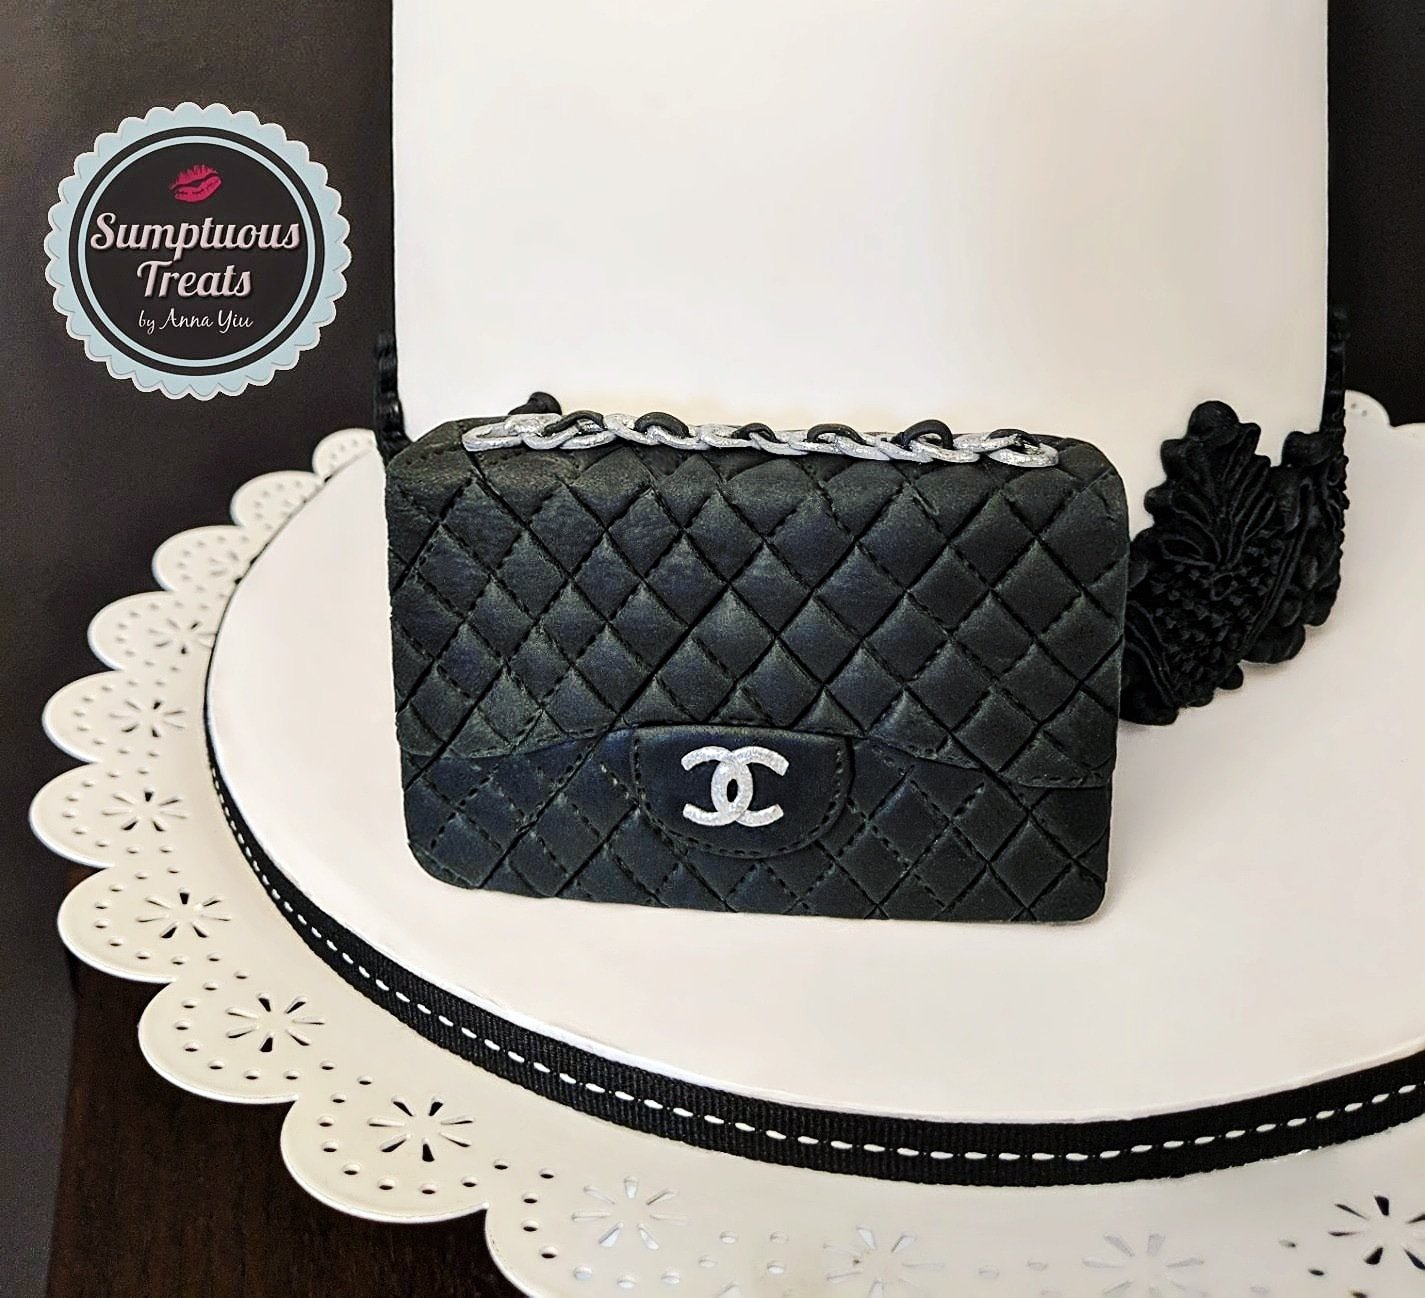 Sumptuous Treats on X: CHANEL Classic Flap Bag Cake Topper